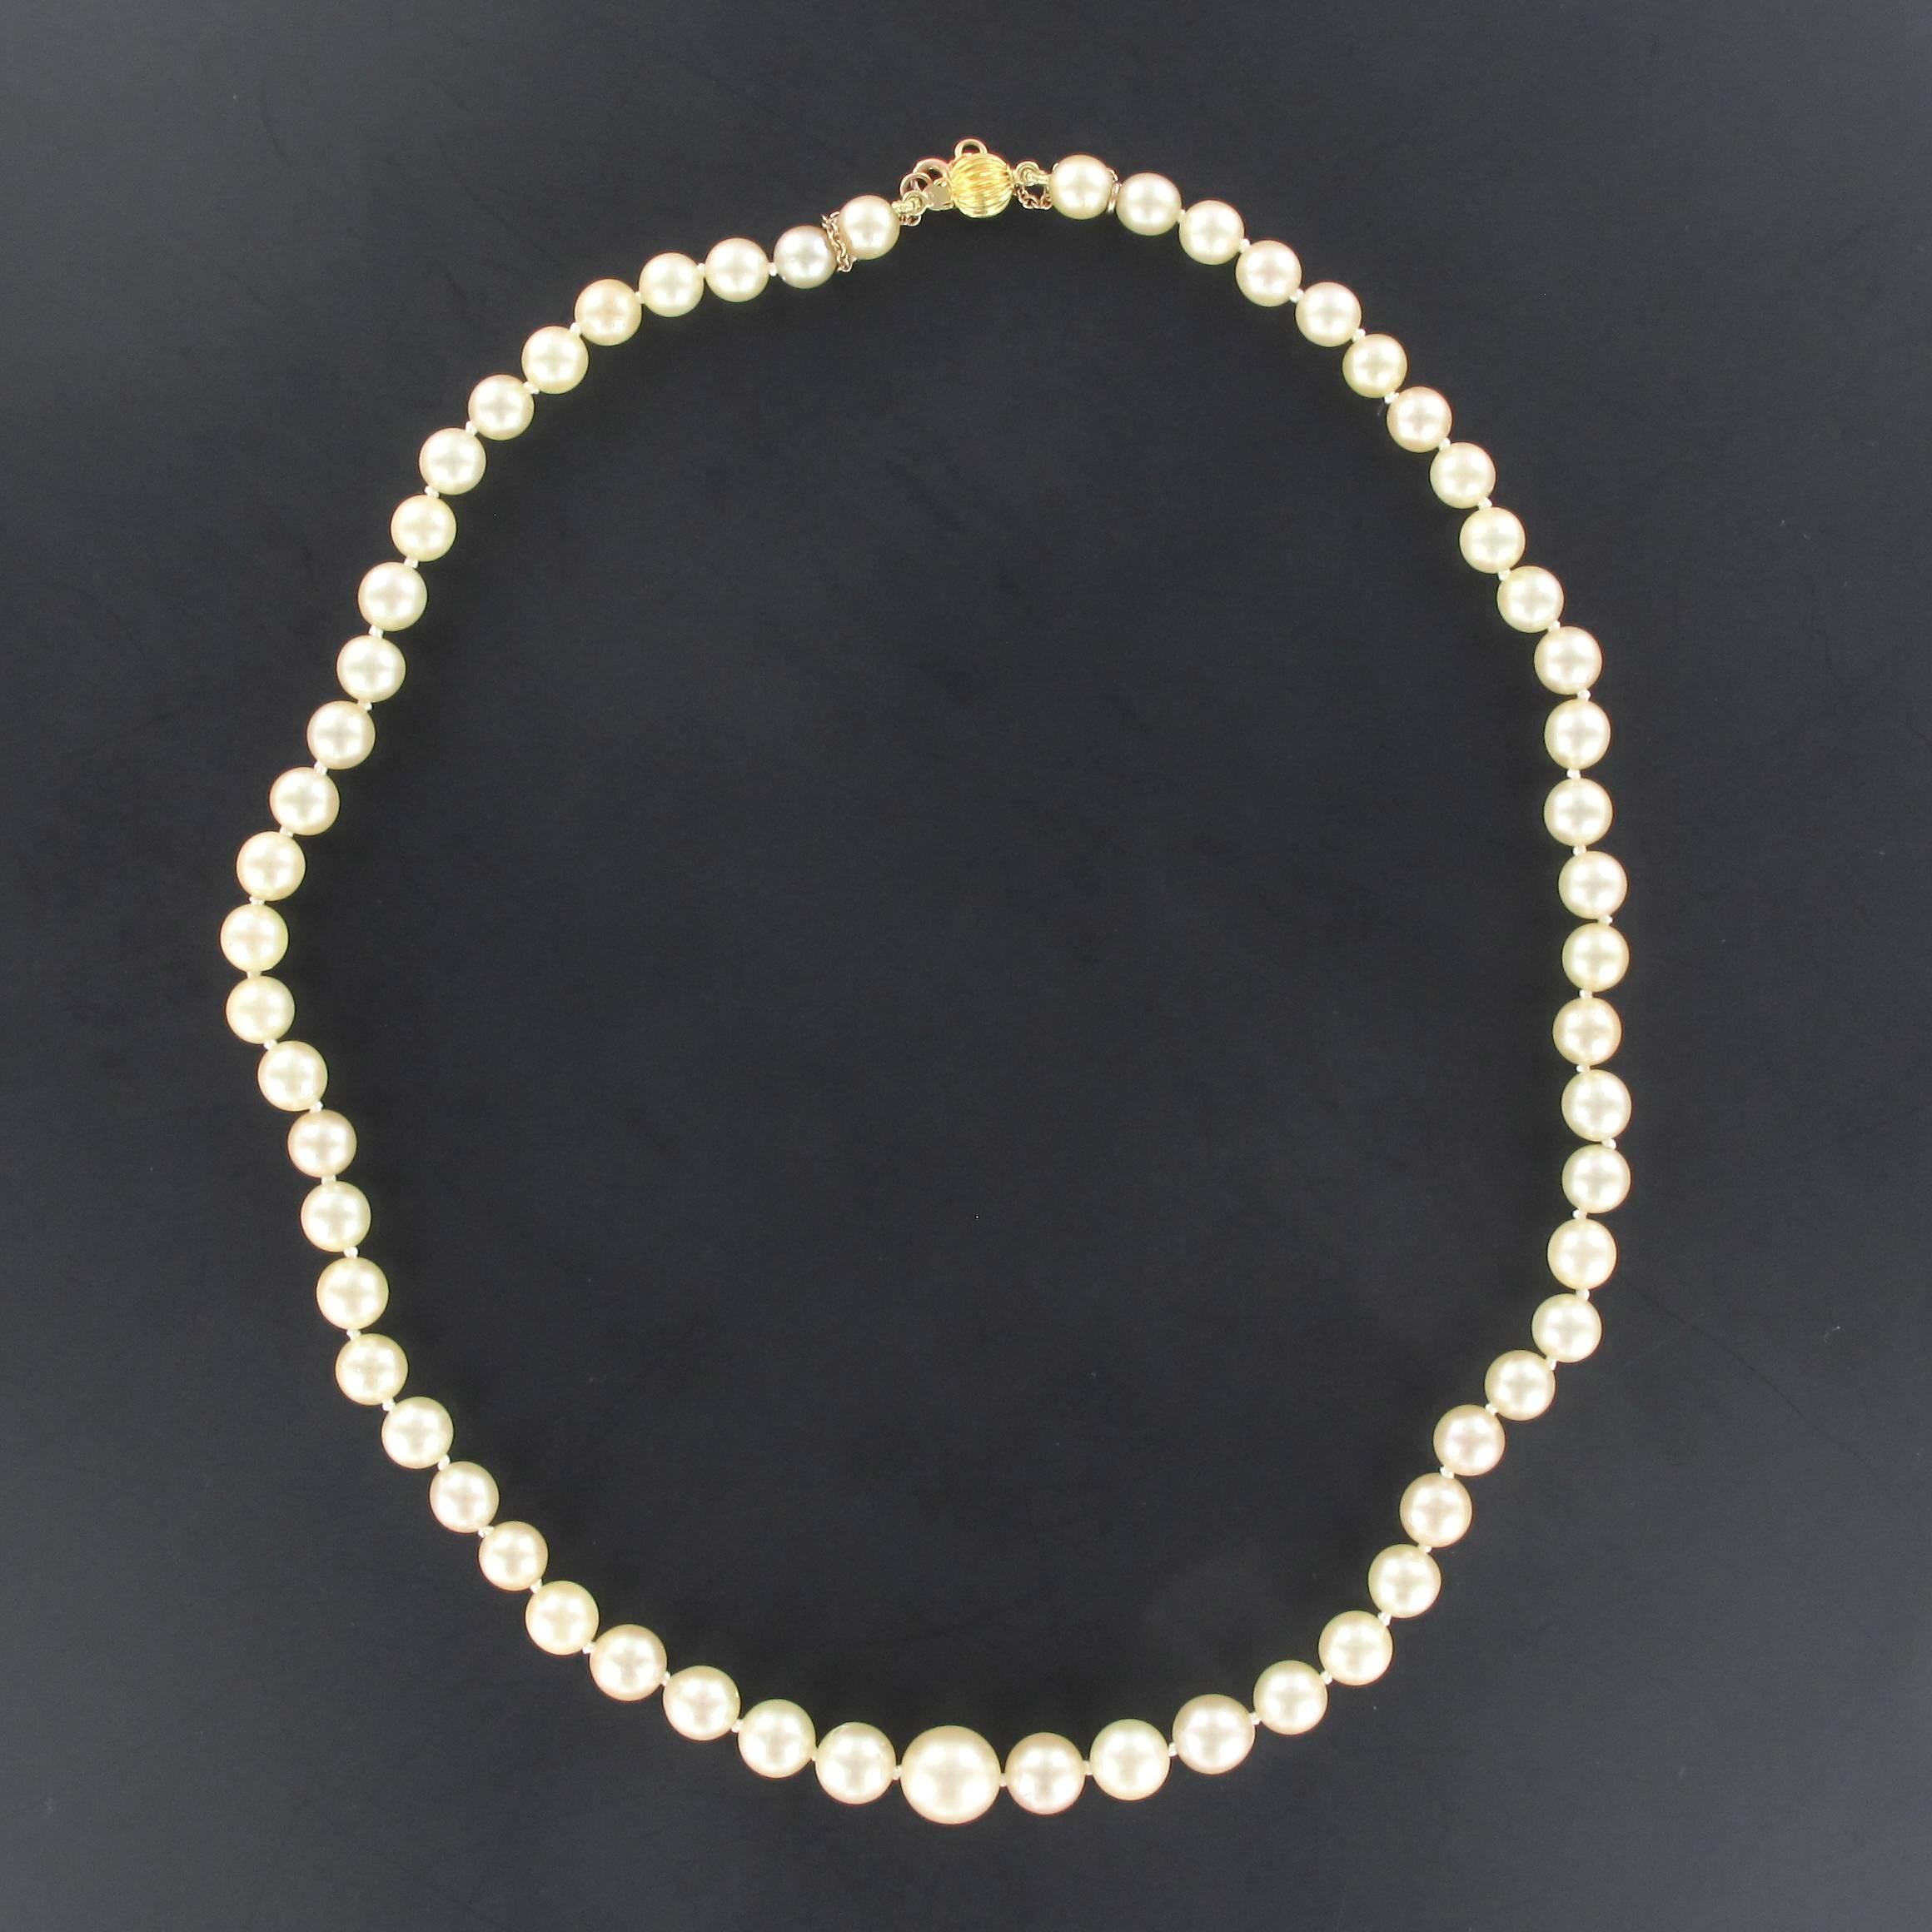 This pearl necklace is composed of a strand of Japanese cultured pearls which are held together by an 18K yellow gold clasp. 

Diameter of the pearls: 5/5,5 to 9/9,5 mm.
Overall length: 45 cm.
Total weight: approximately 24,7 g.

The necklace was